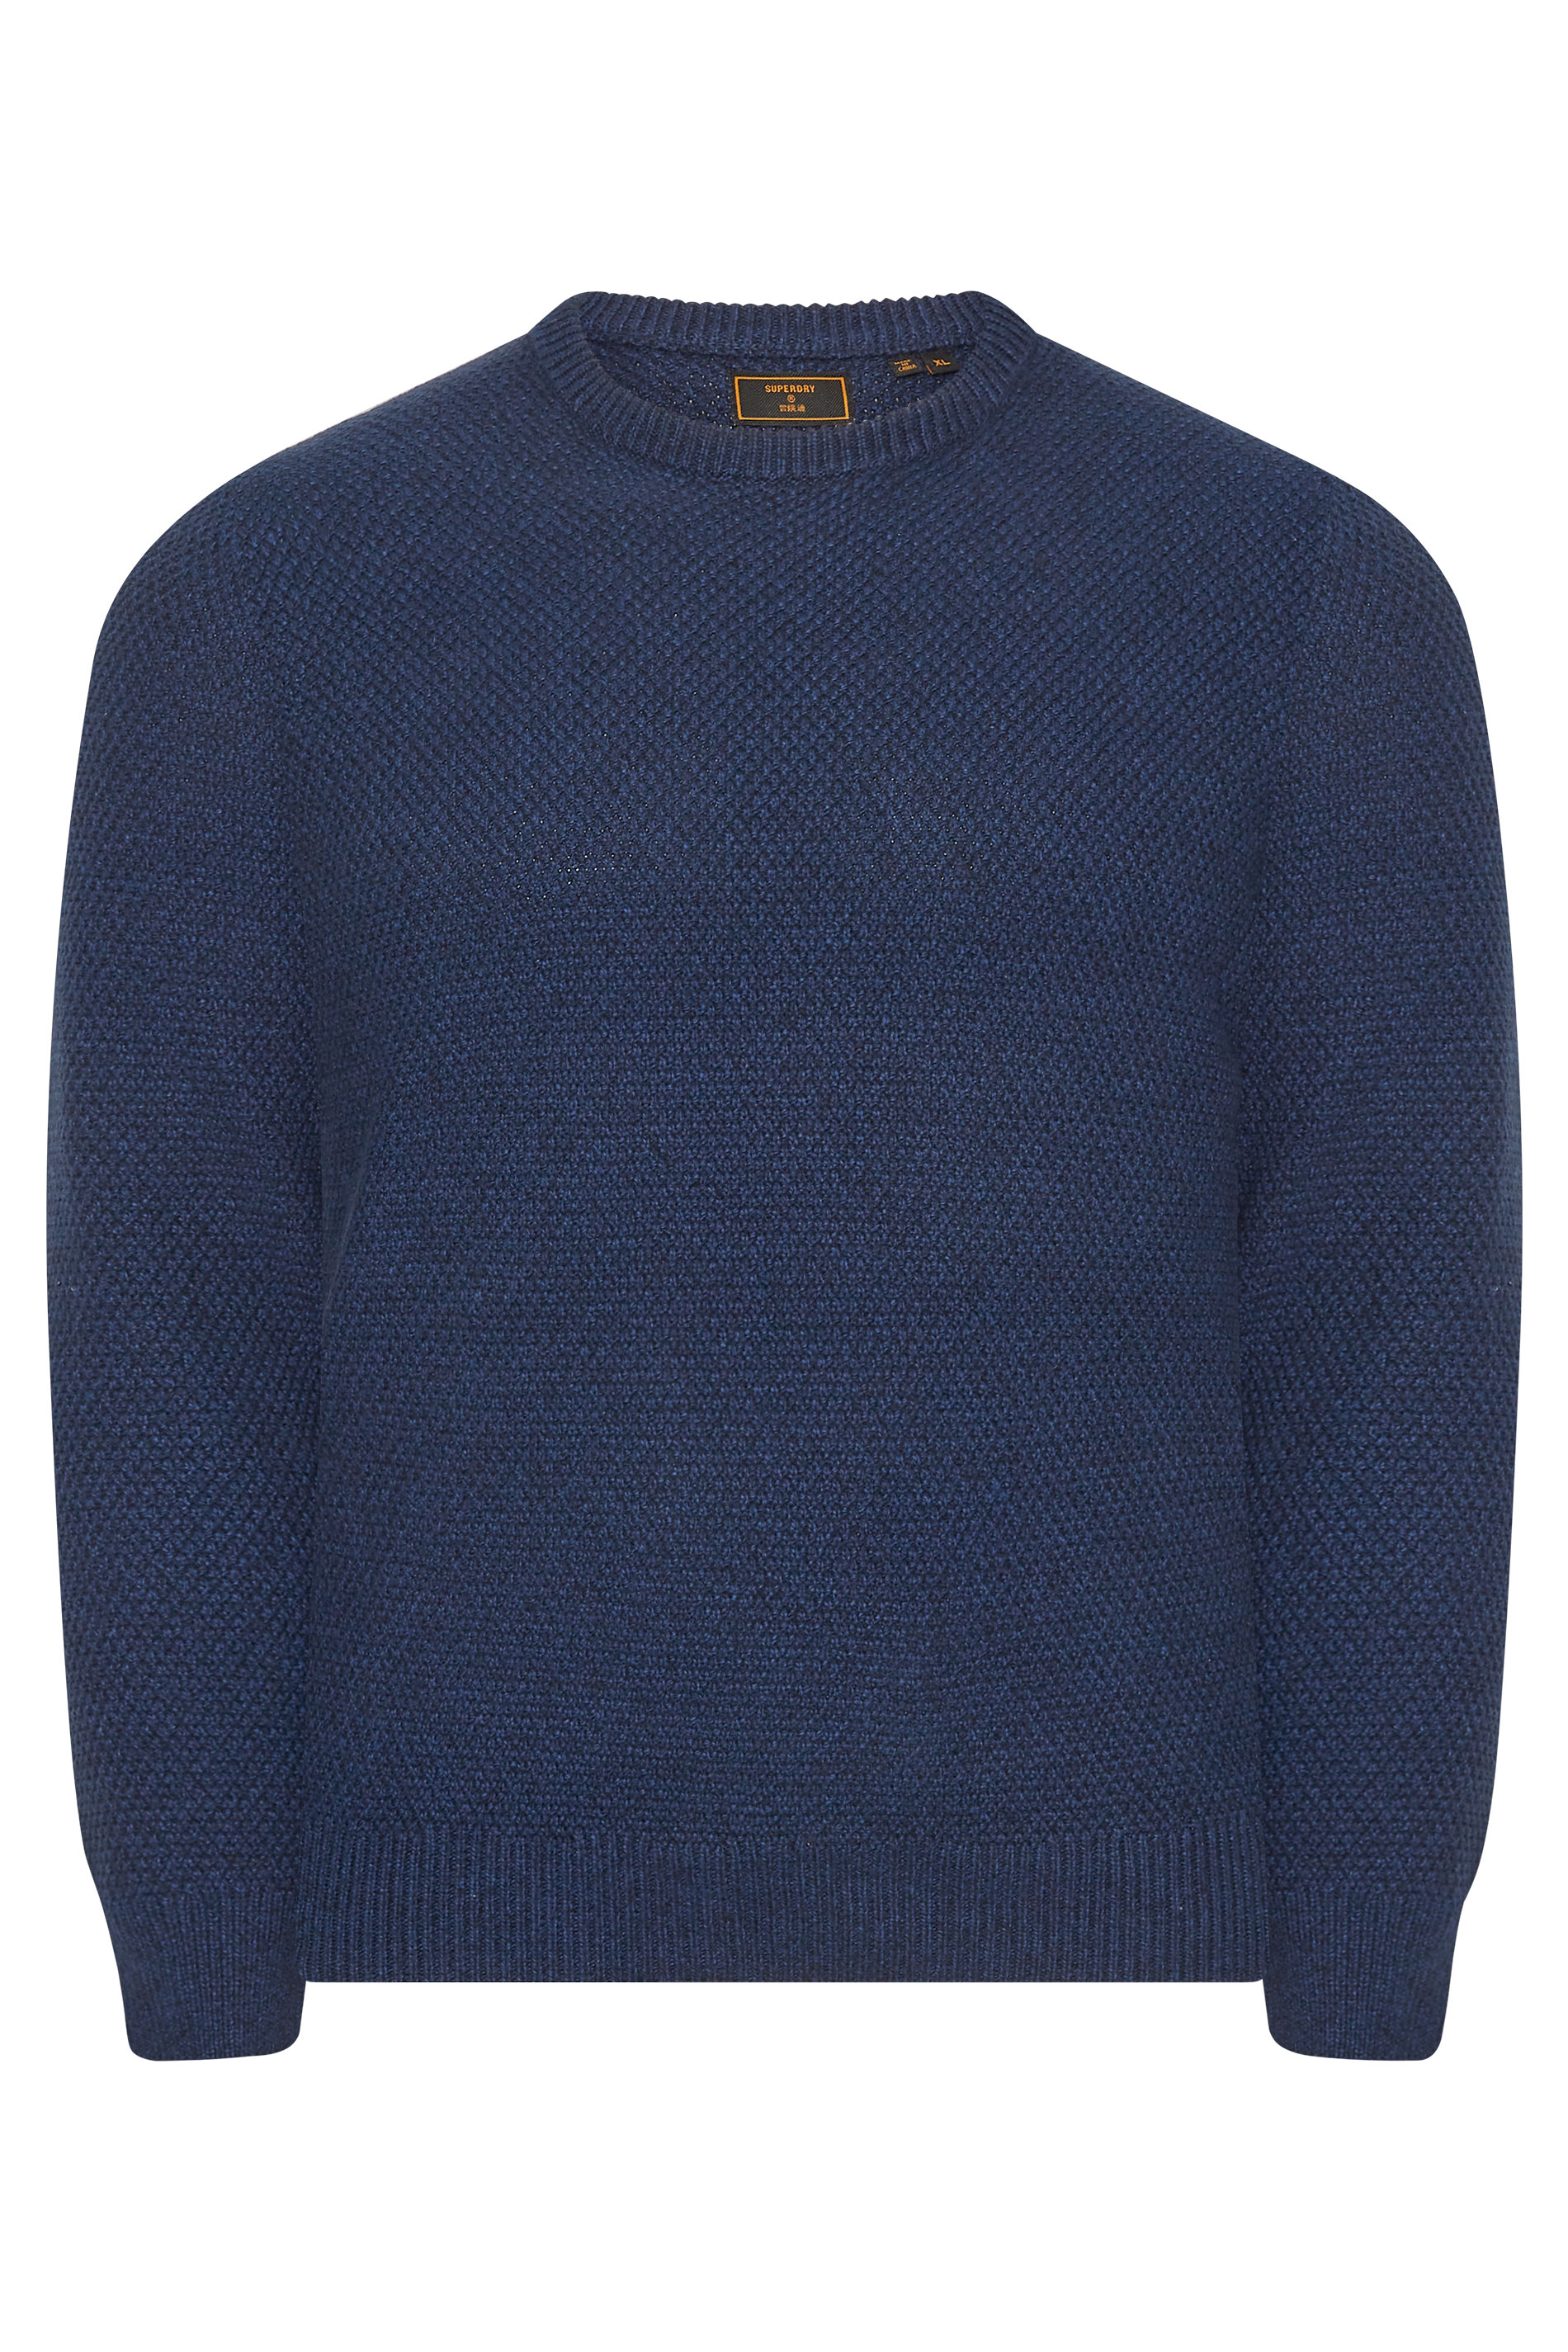 SUPERDRY Big & Tall Navy Blue Knitted Jumper 1